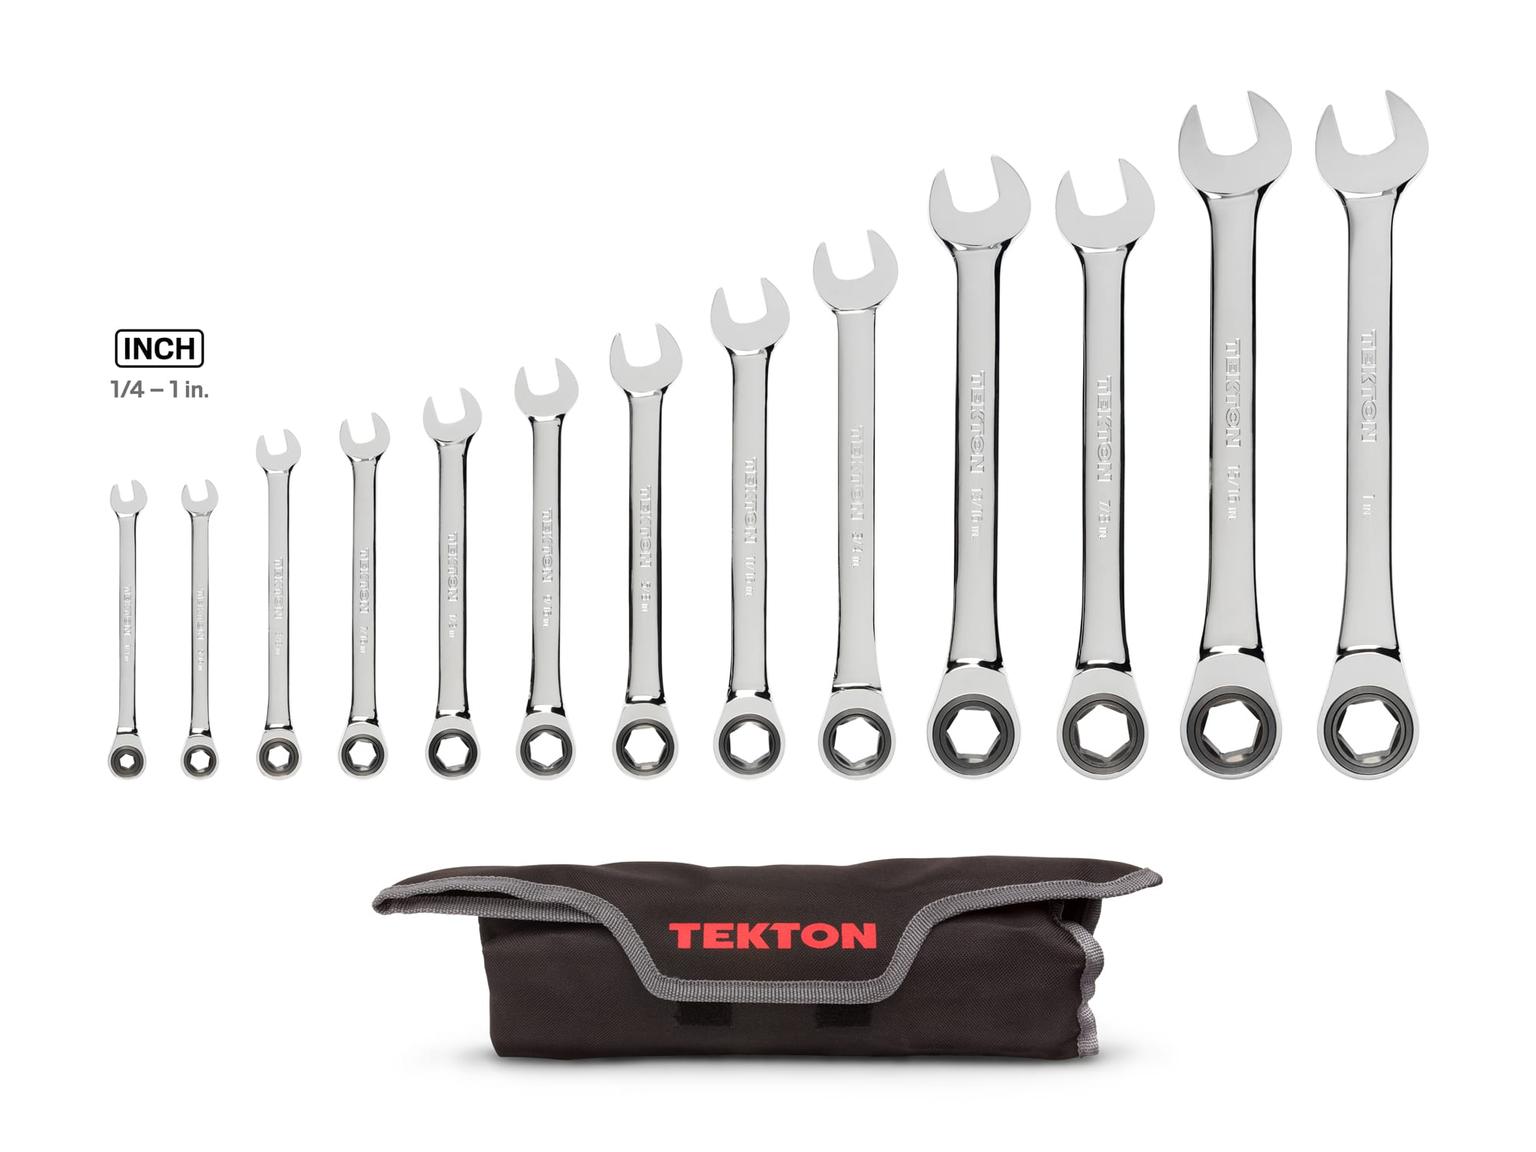 TEKTON WRN53091-T Ratcheting Combination Wrench Set with Pouch, 13-Piece (1/4-1 in.)